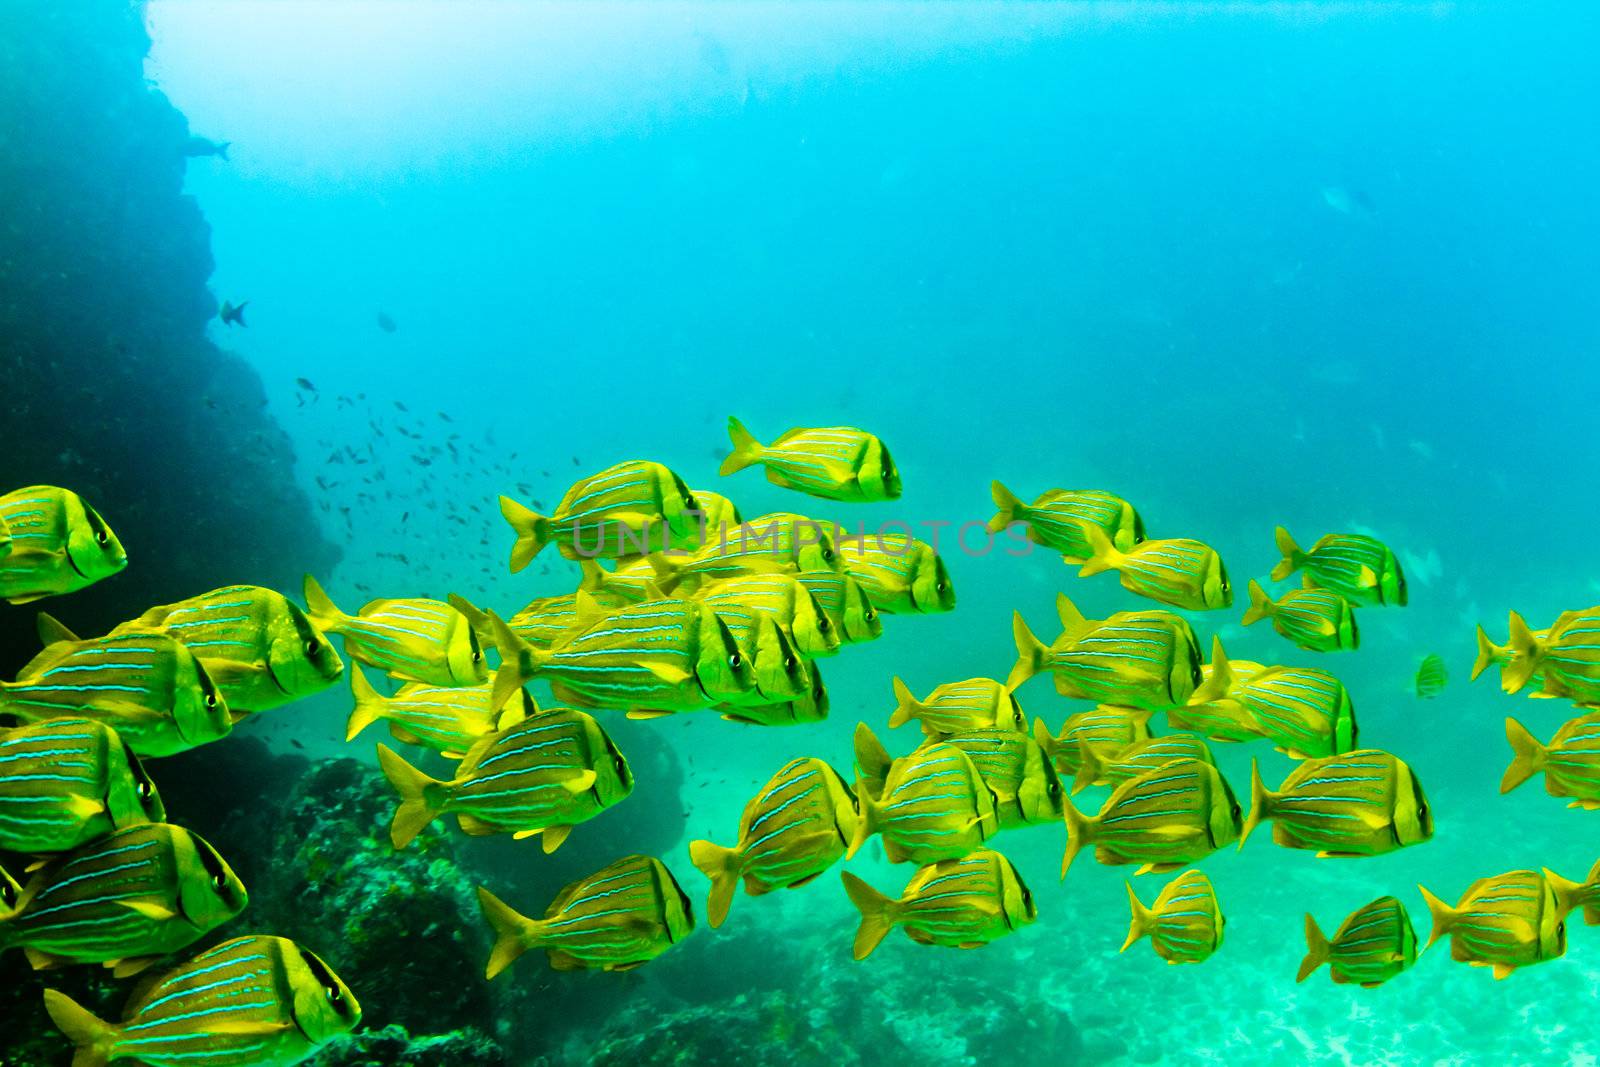 A school of tropical yellow reef fish.